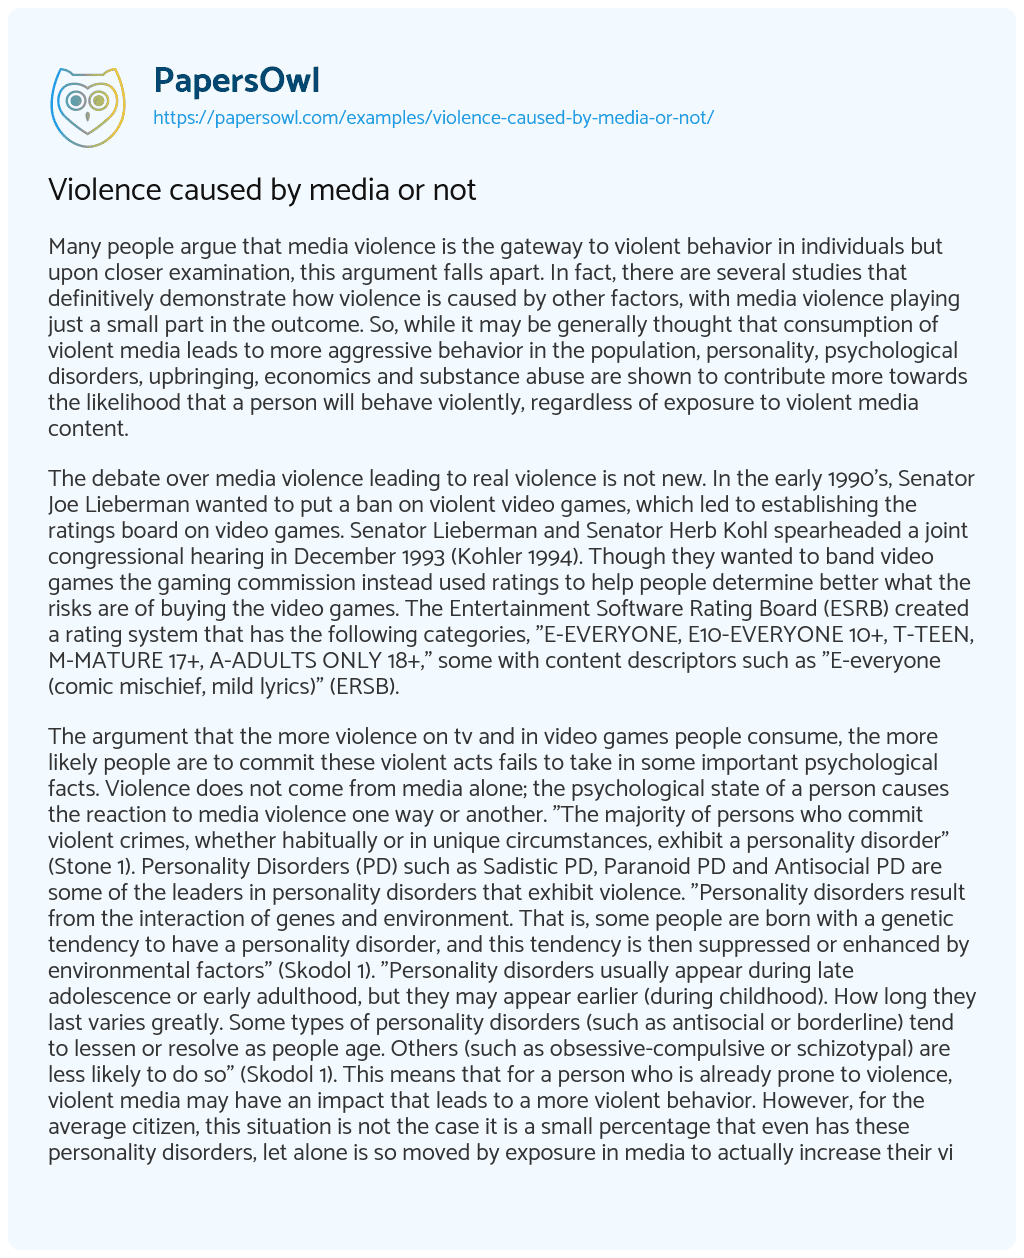 Violence Caused by Media or not essay